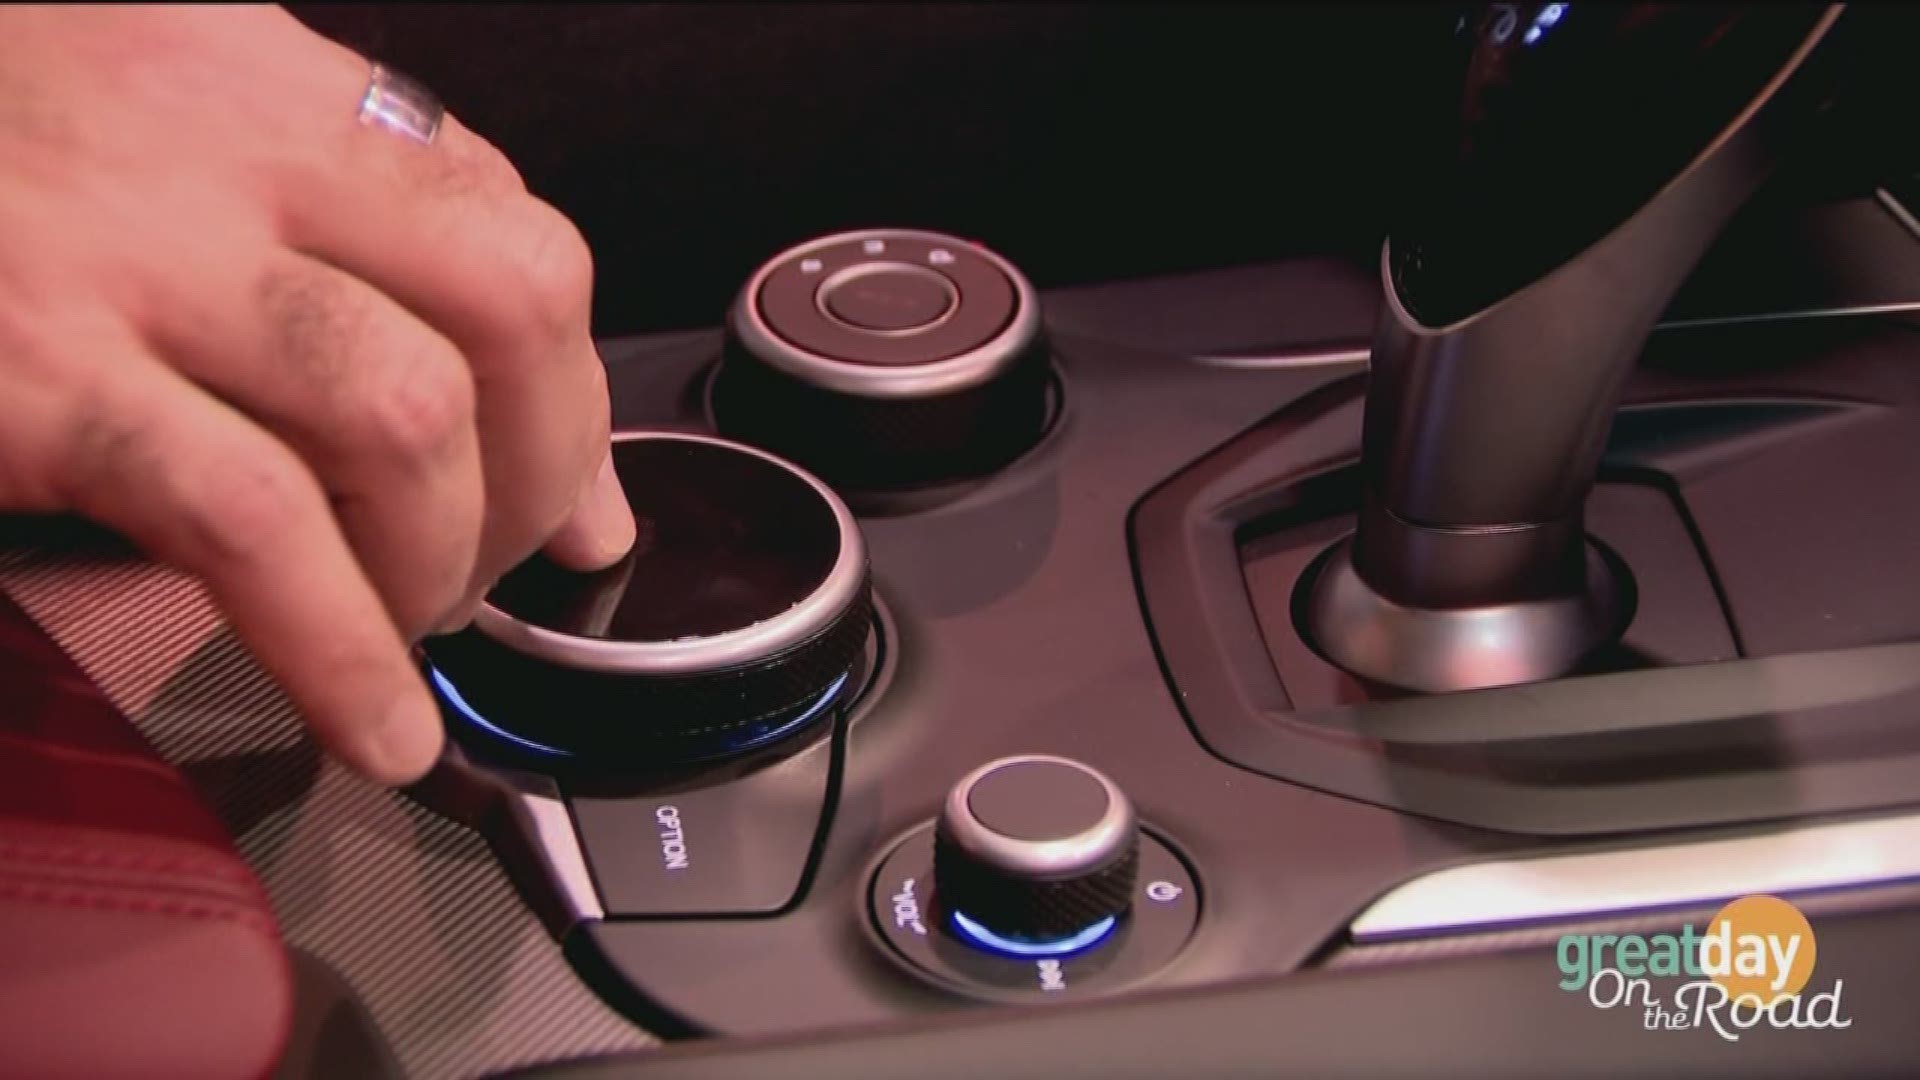 Michael Garfield, The High Tech Texan takes on a tour of the hottest auto tech innovations at the Houston Auto Show.